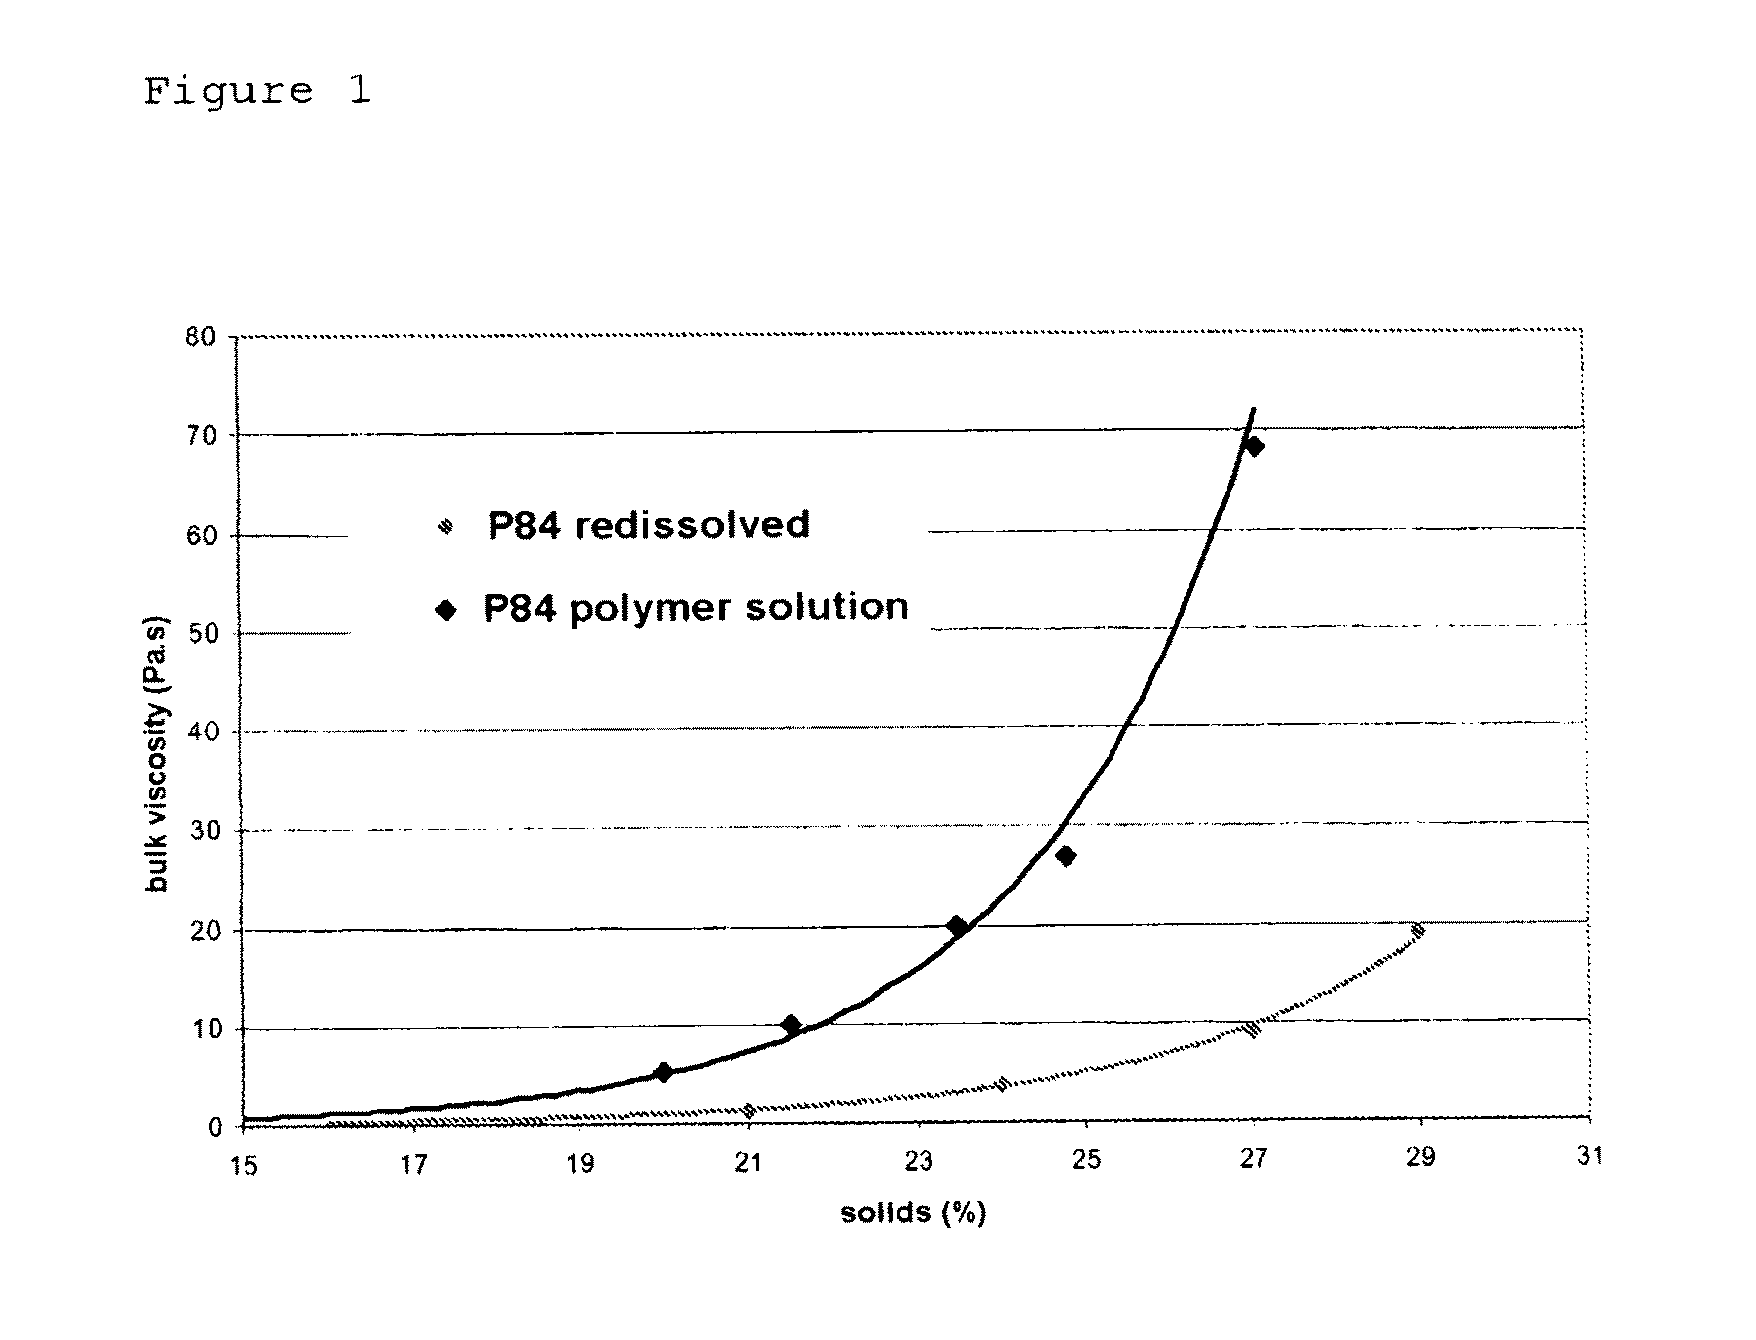 Polyimide membranes made of polymerization solutions